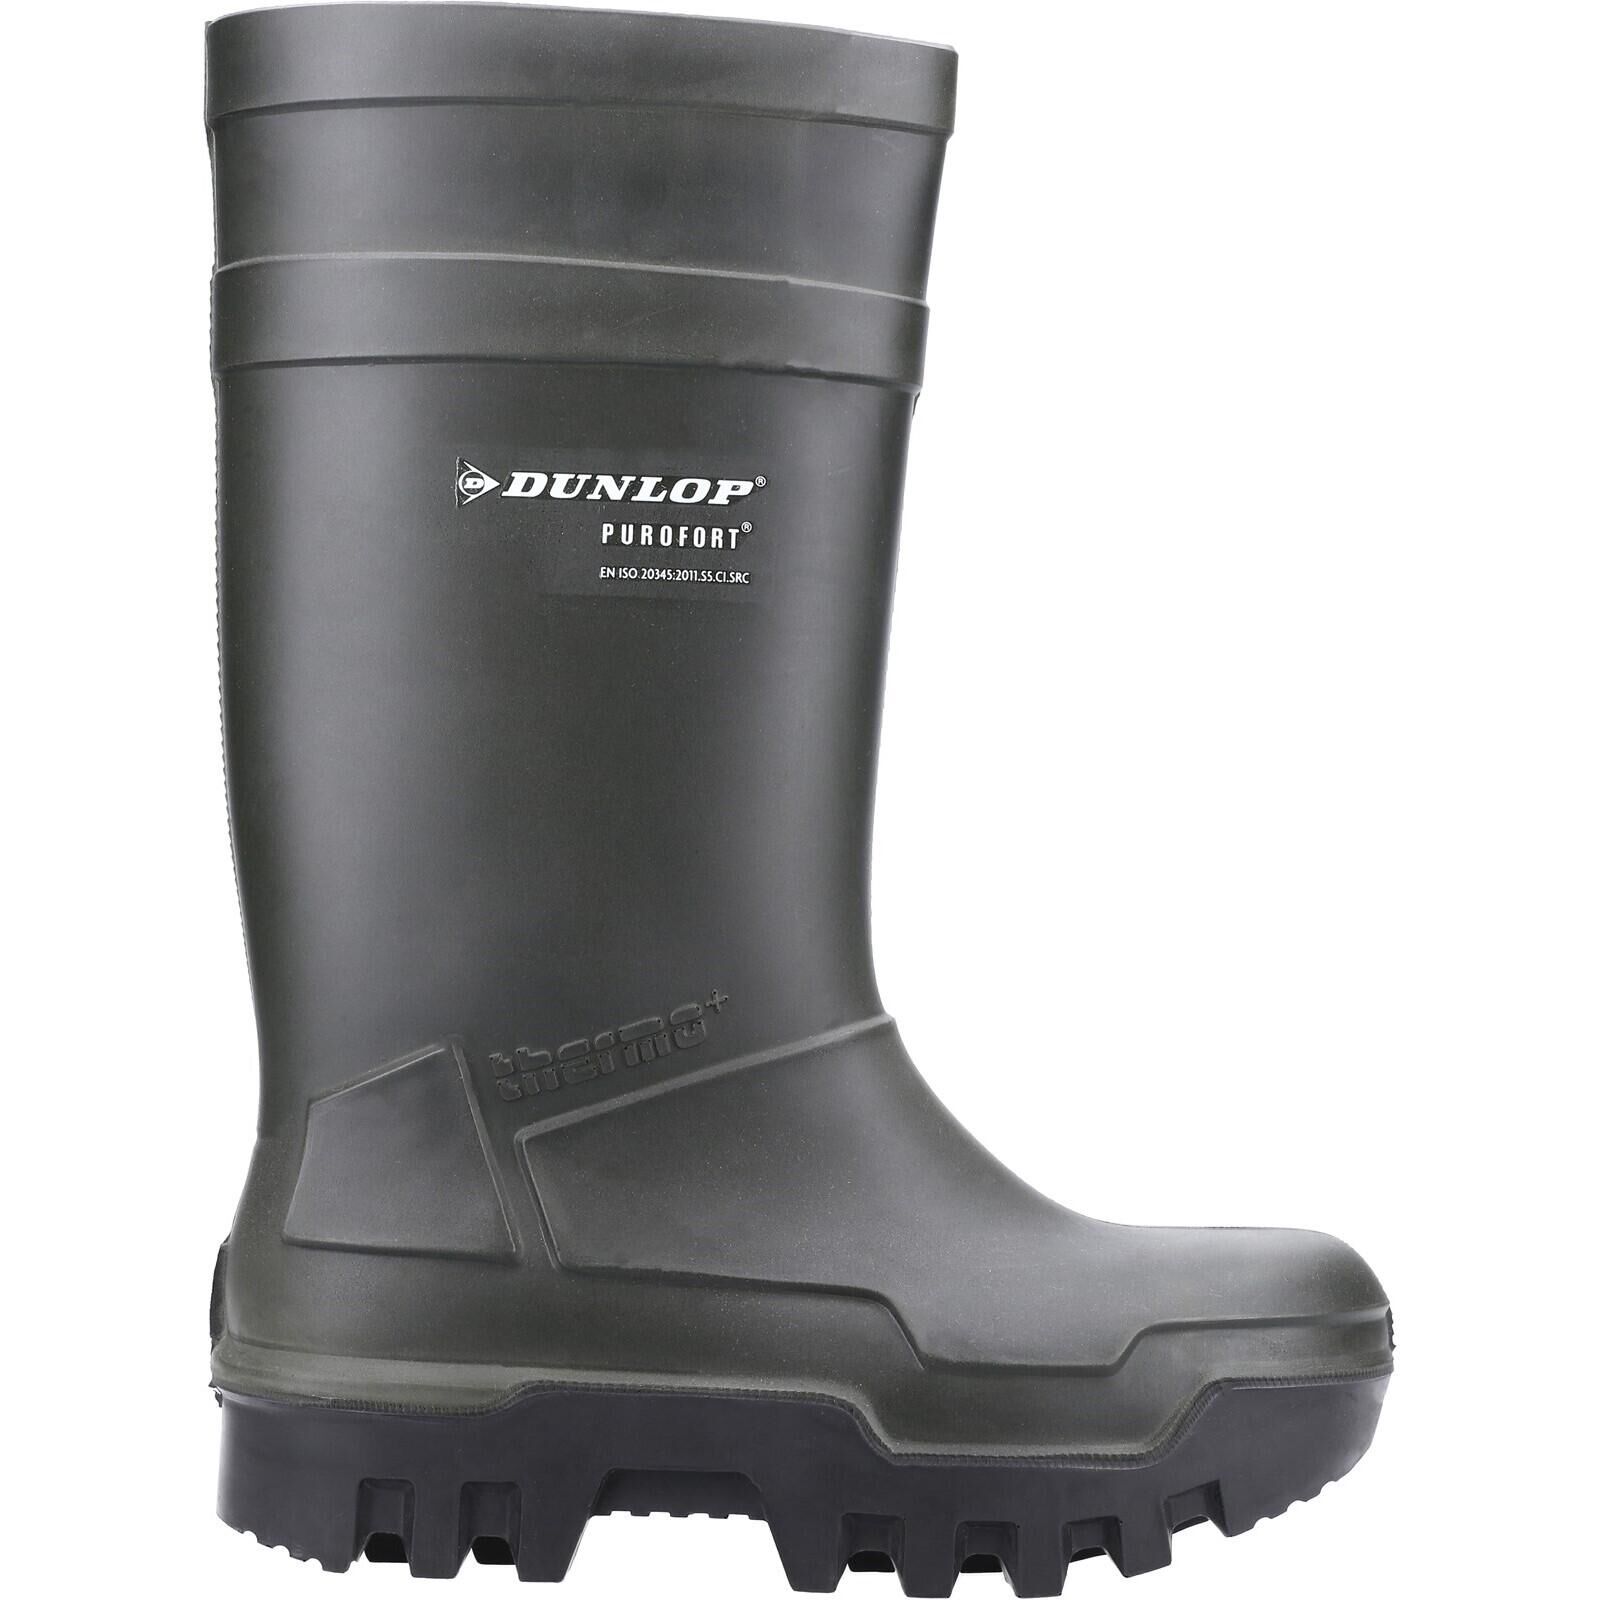 DUNLOP Purofort Thermo+ Safety Wellingtons GREEN